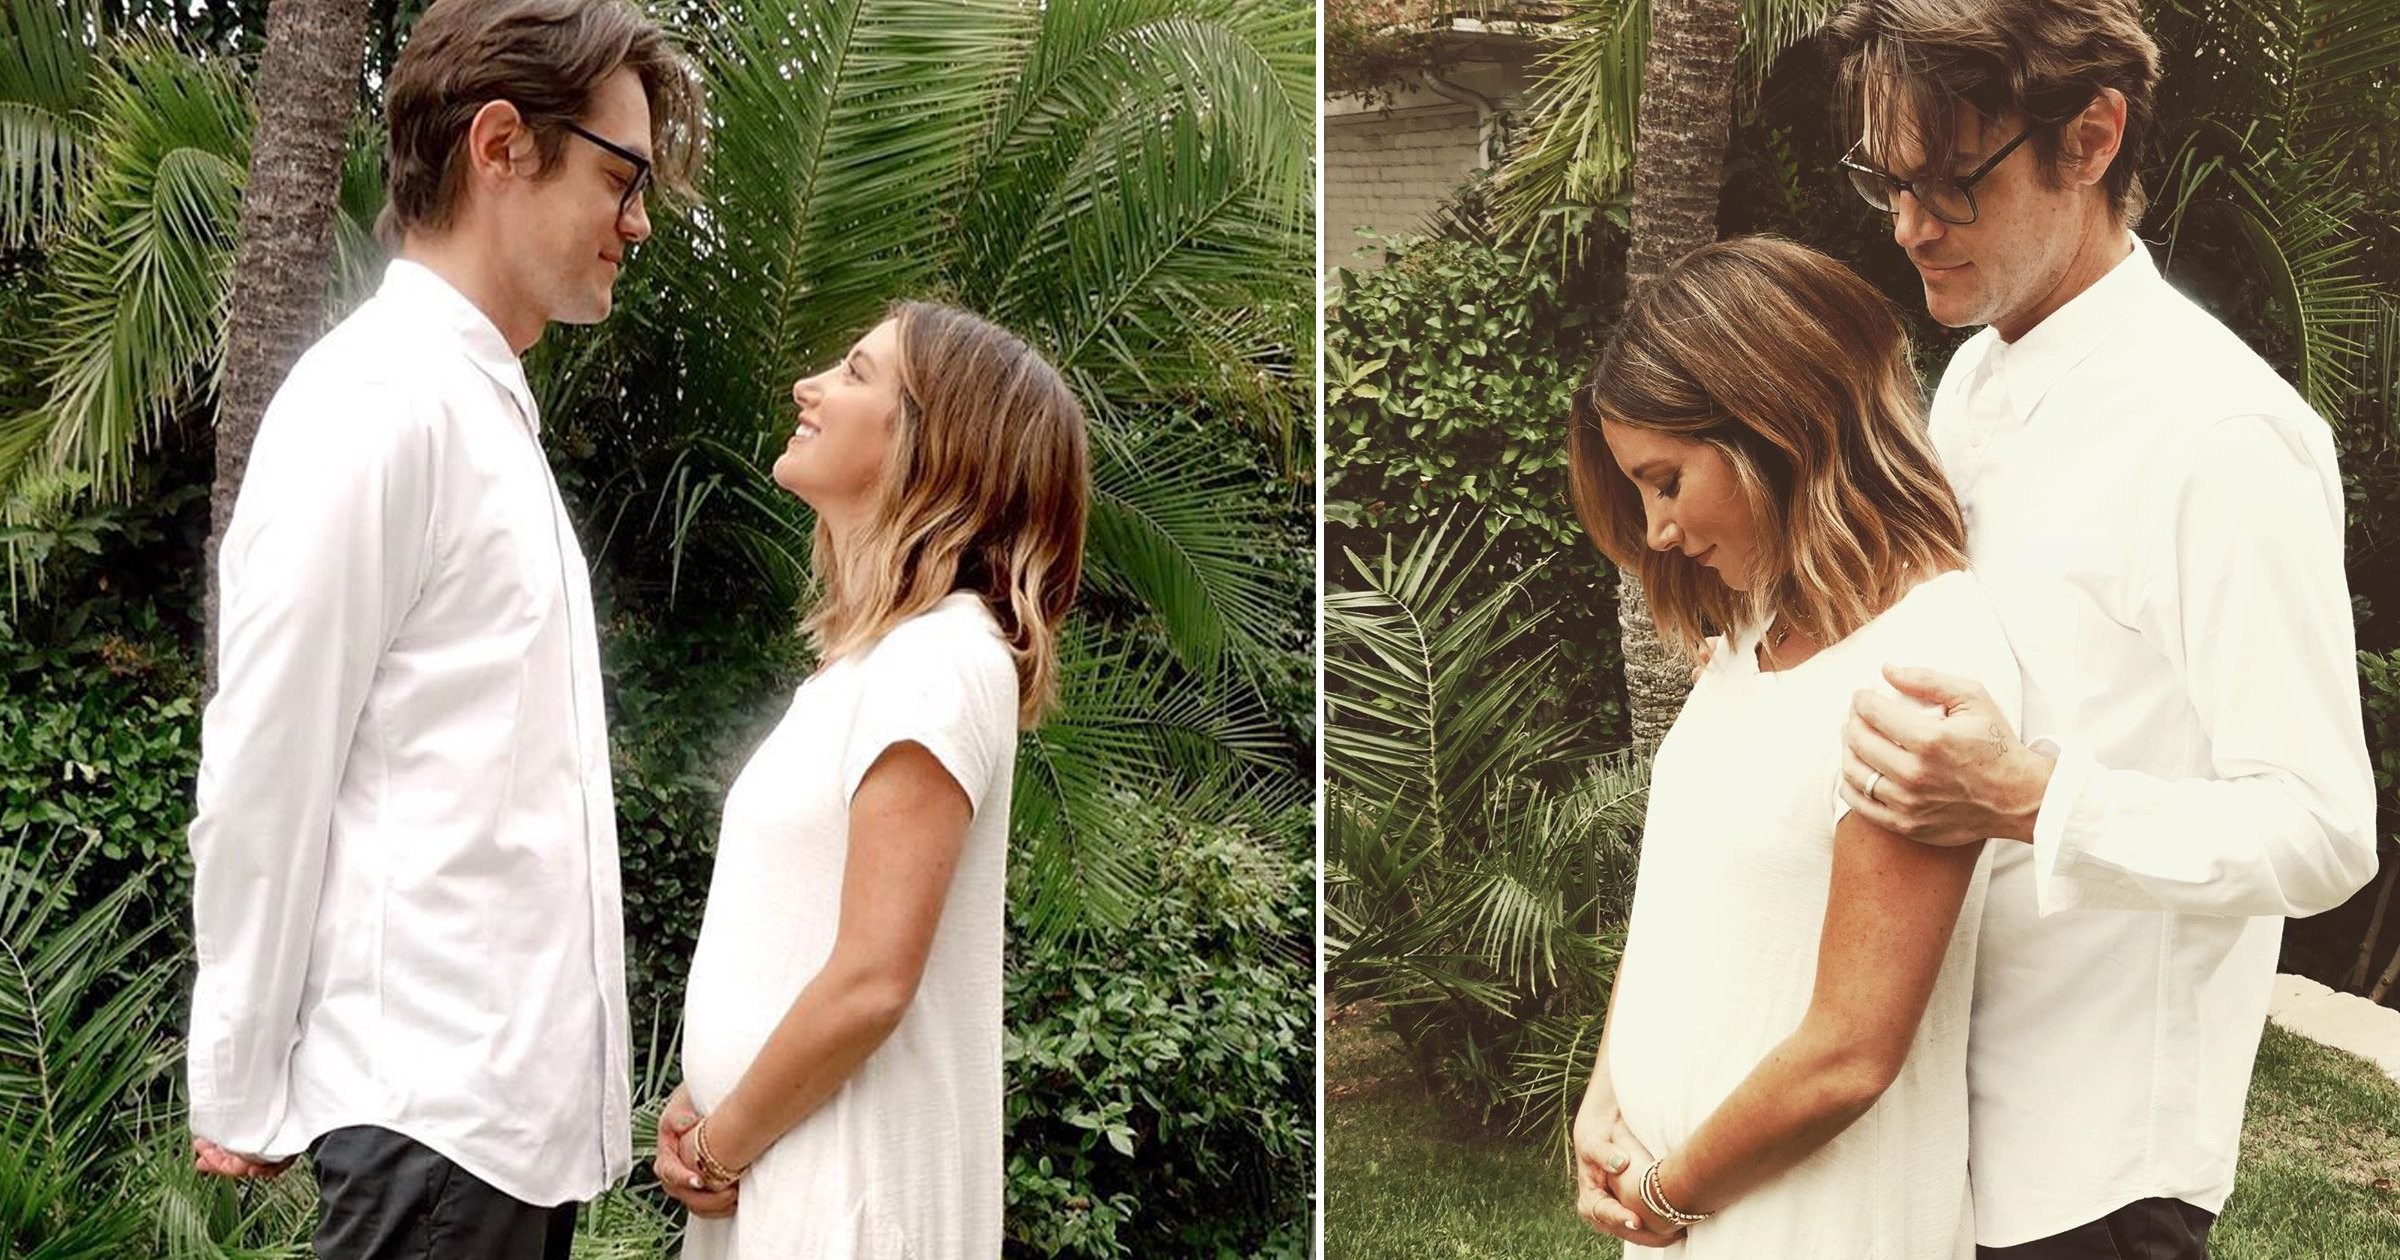 High School Musical star Ashley Tisdale reveals she’s pregnant with her first child